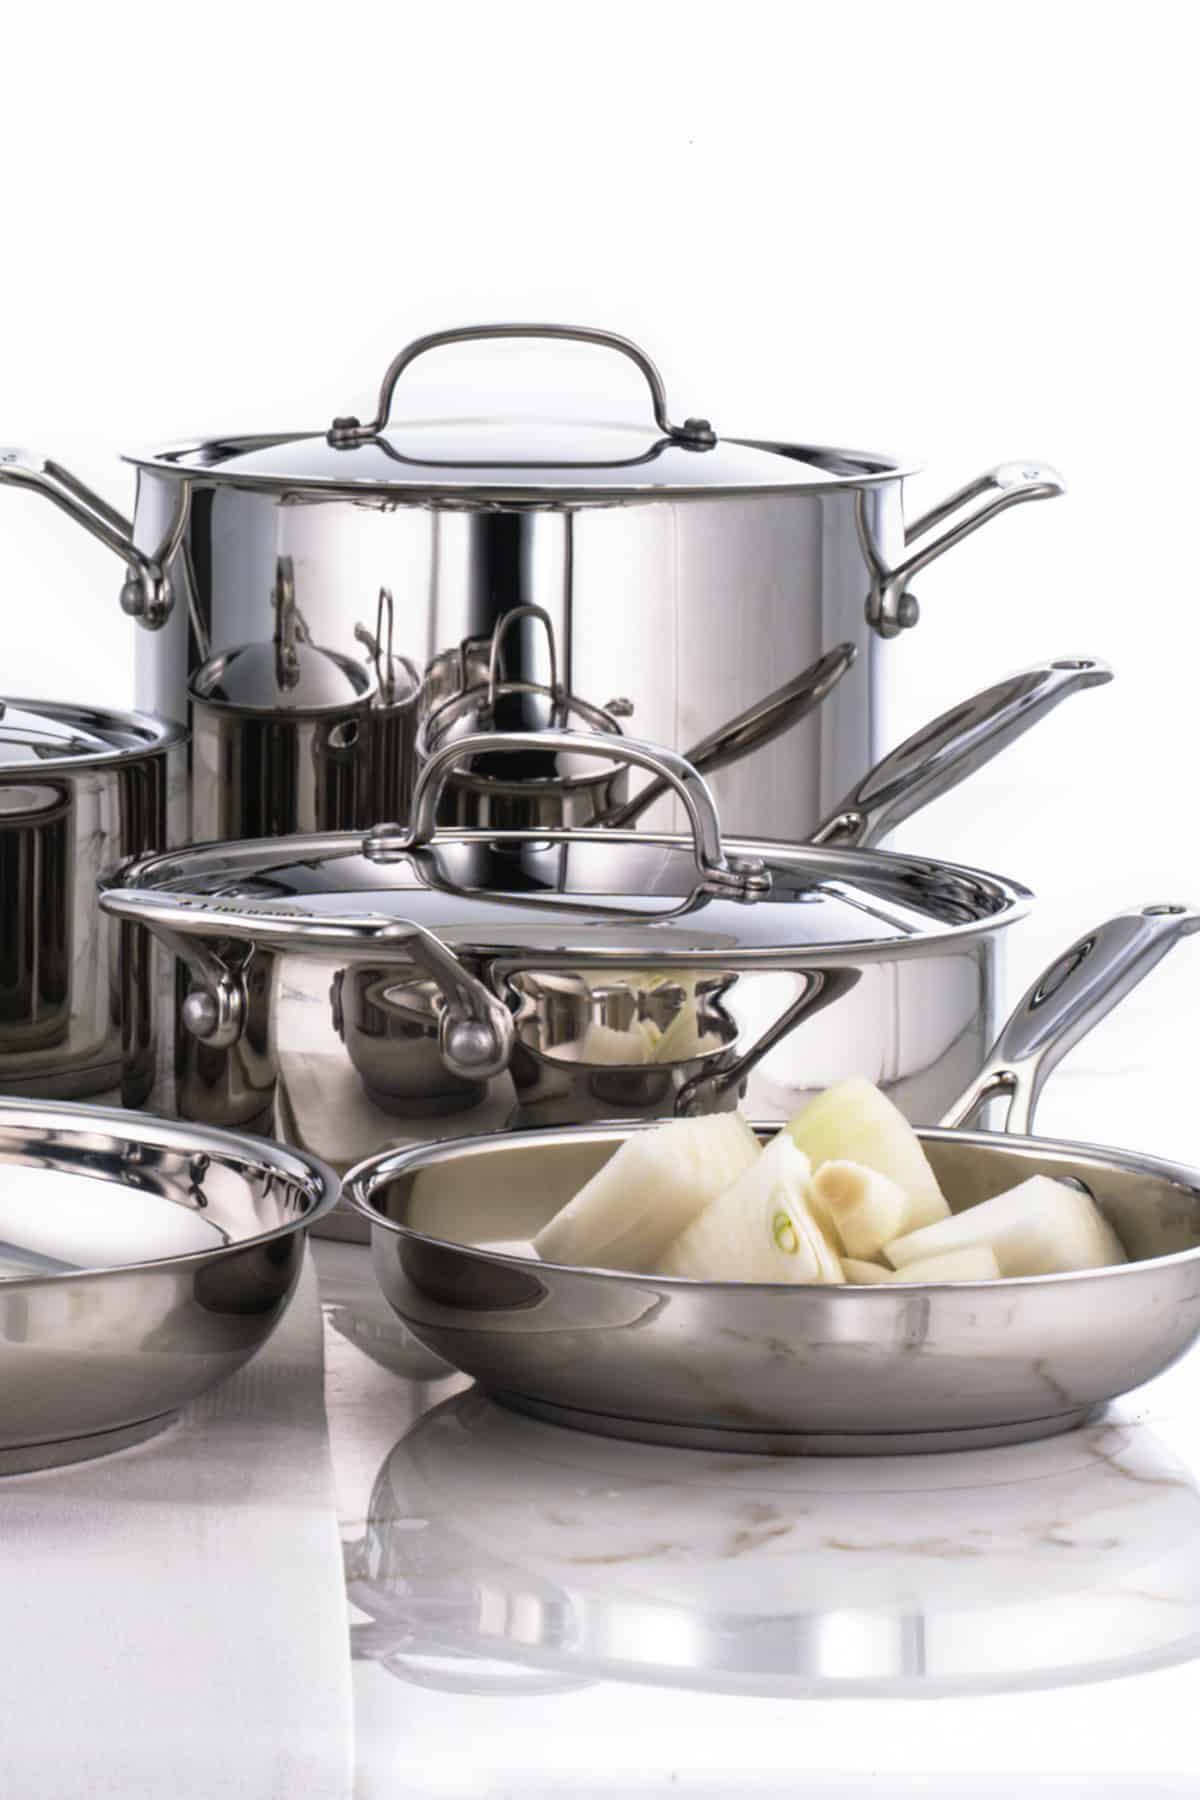 Stainless steel frying pan with white onions in it and other stainless steel pots behind it. 